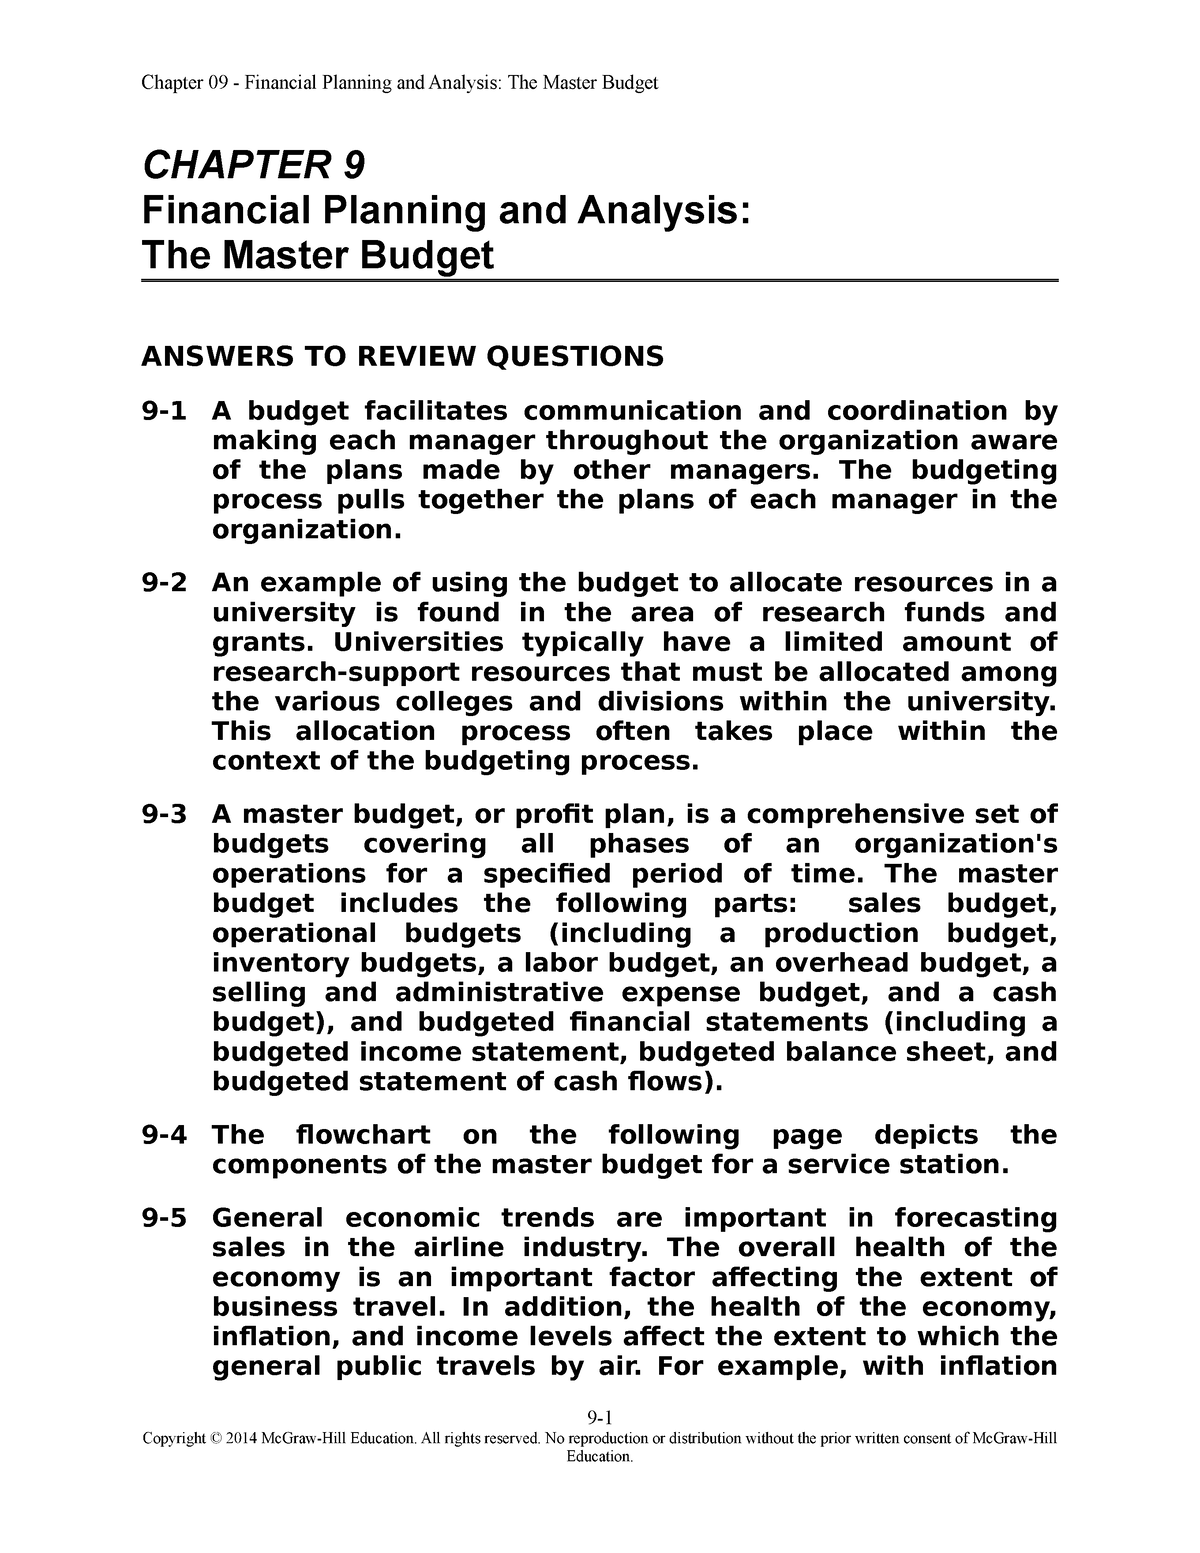 chap009-homework-lecture-notes-3-7-chapter-9-financial-planning-and